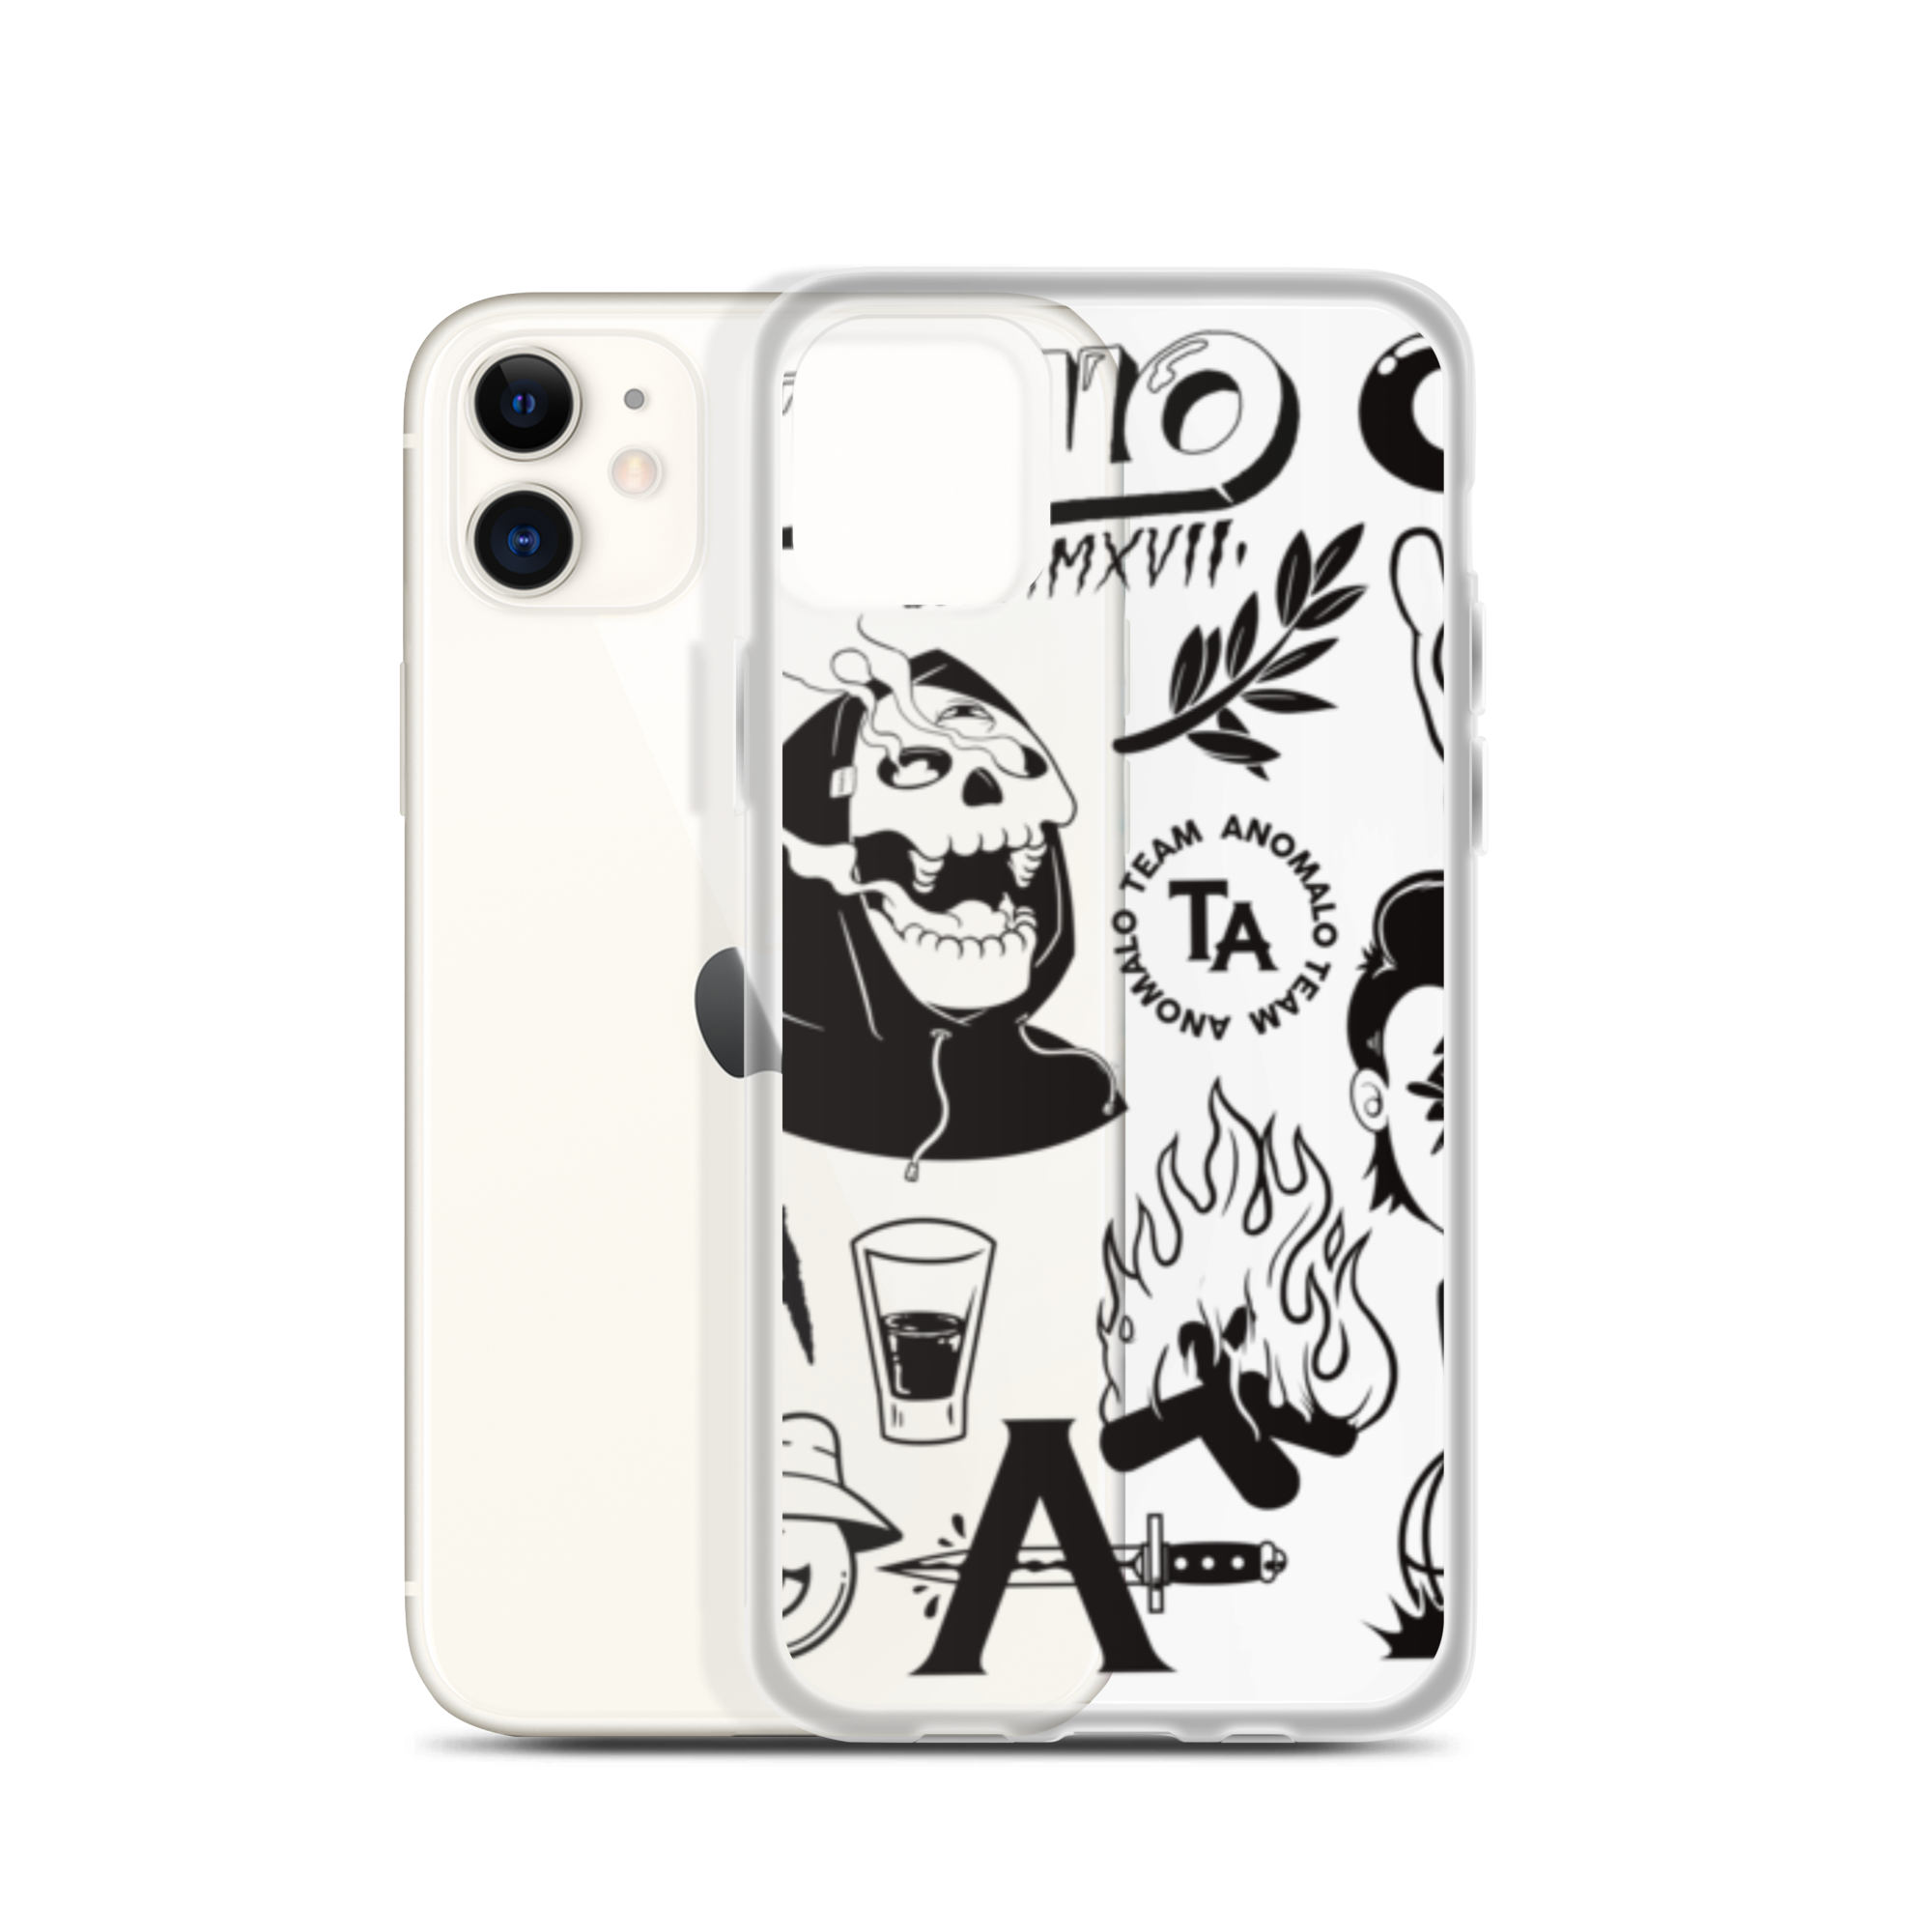 Carcasa transparente iPhone® Mix Stay Cool